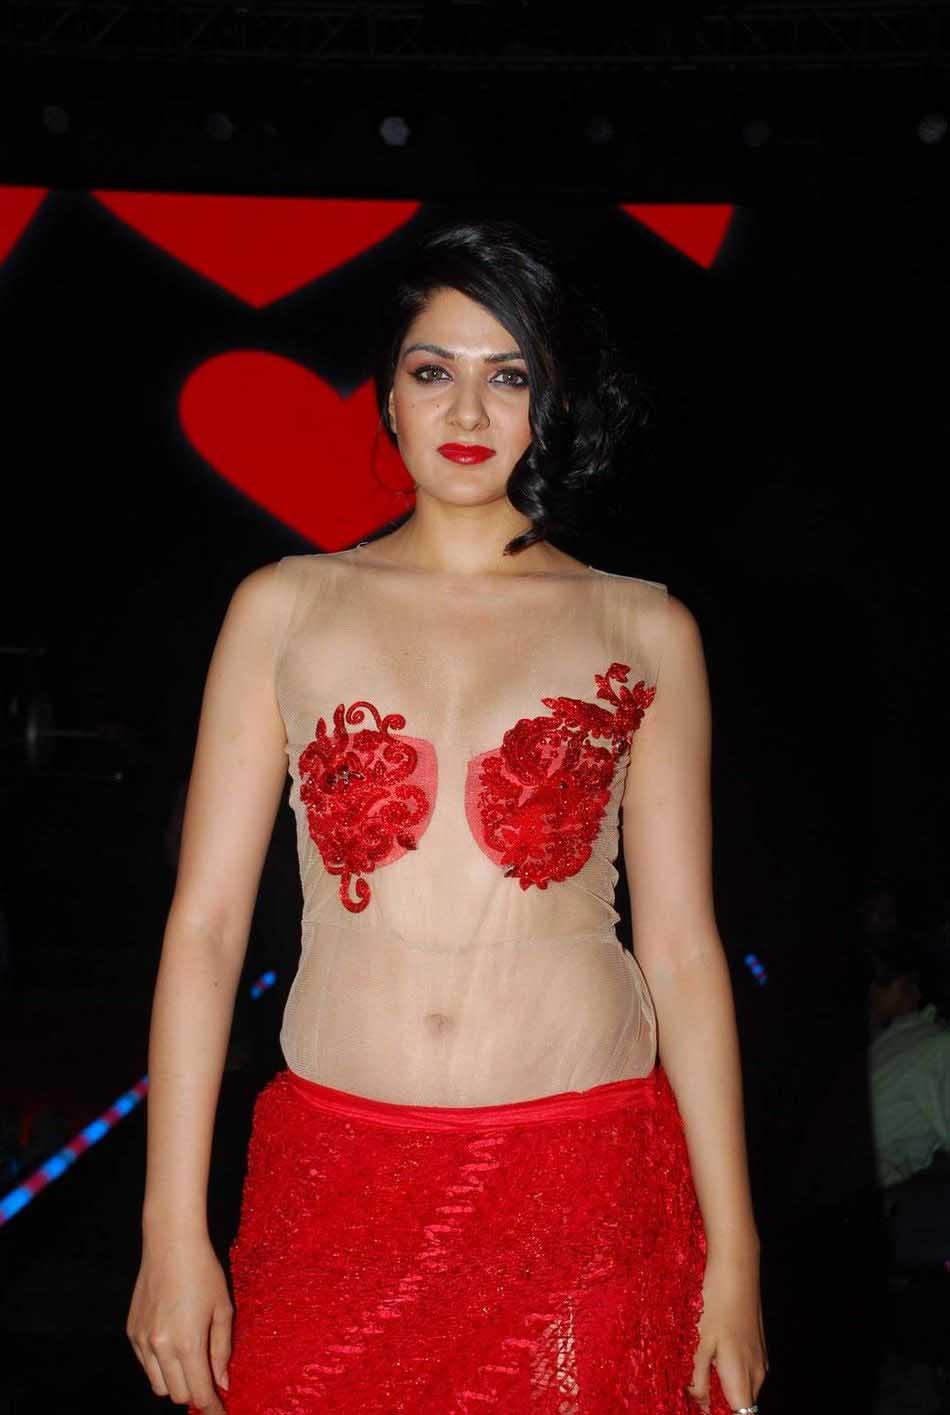 Sakshi Chaudhary Sexy Navel And Cleavage Show In Transparent Dress 4 Aaabgcq